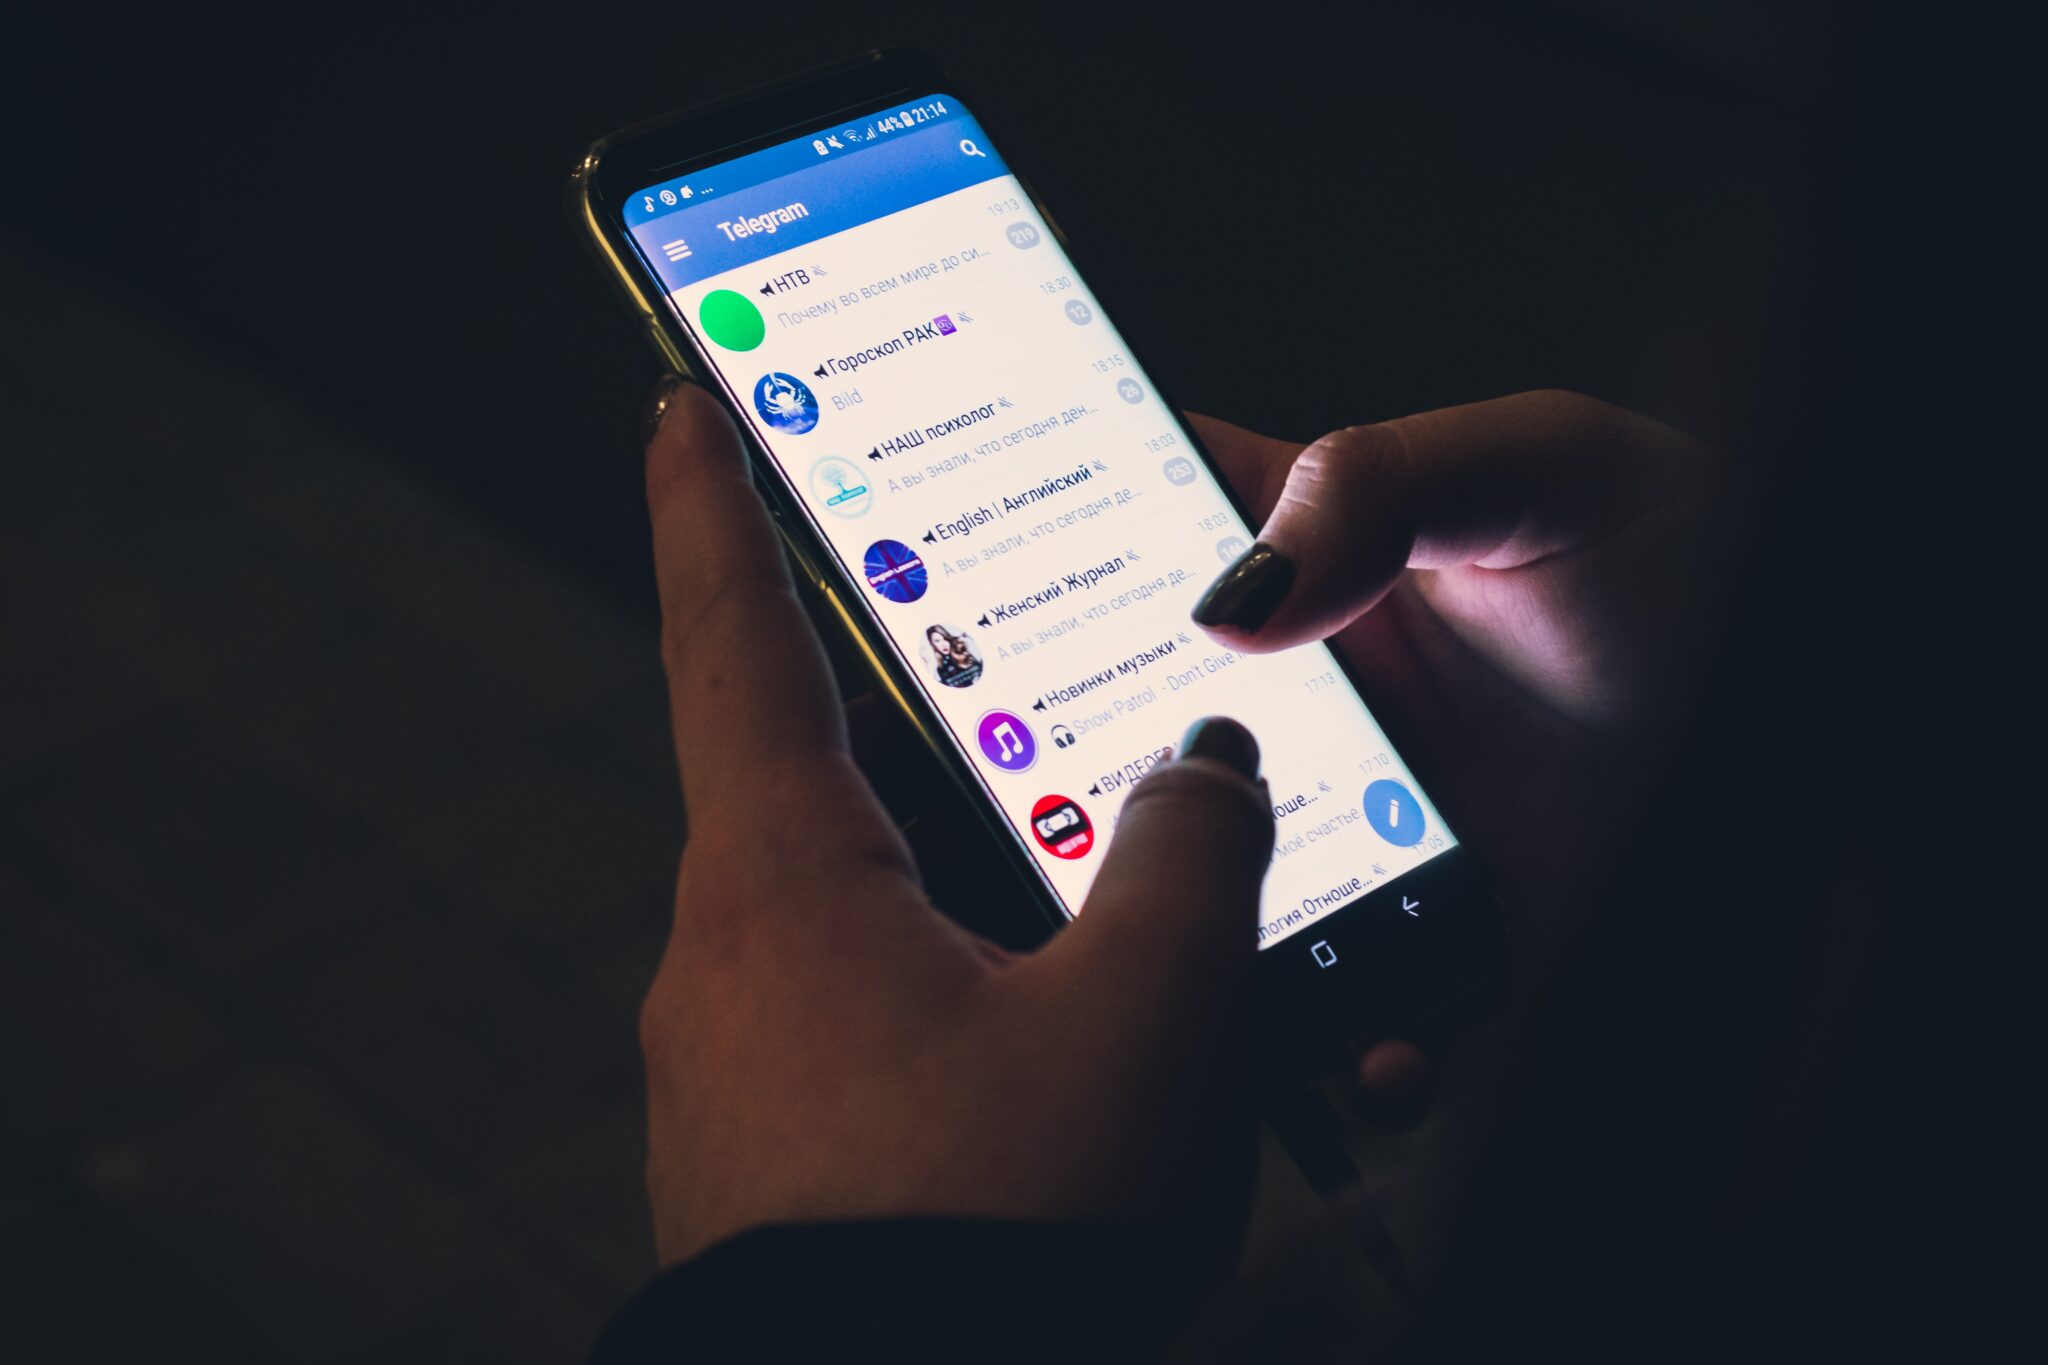 hands typing on a phone showing Telegram chats